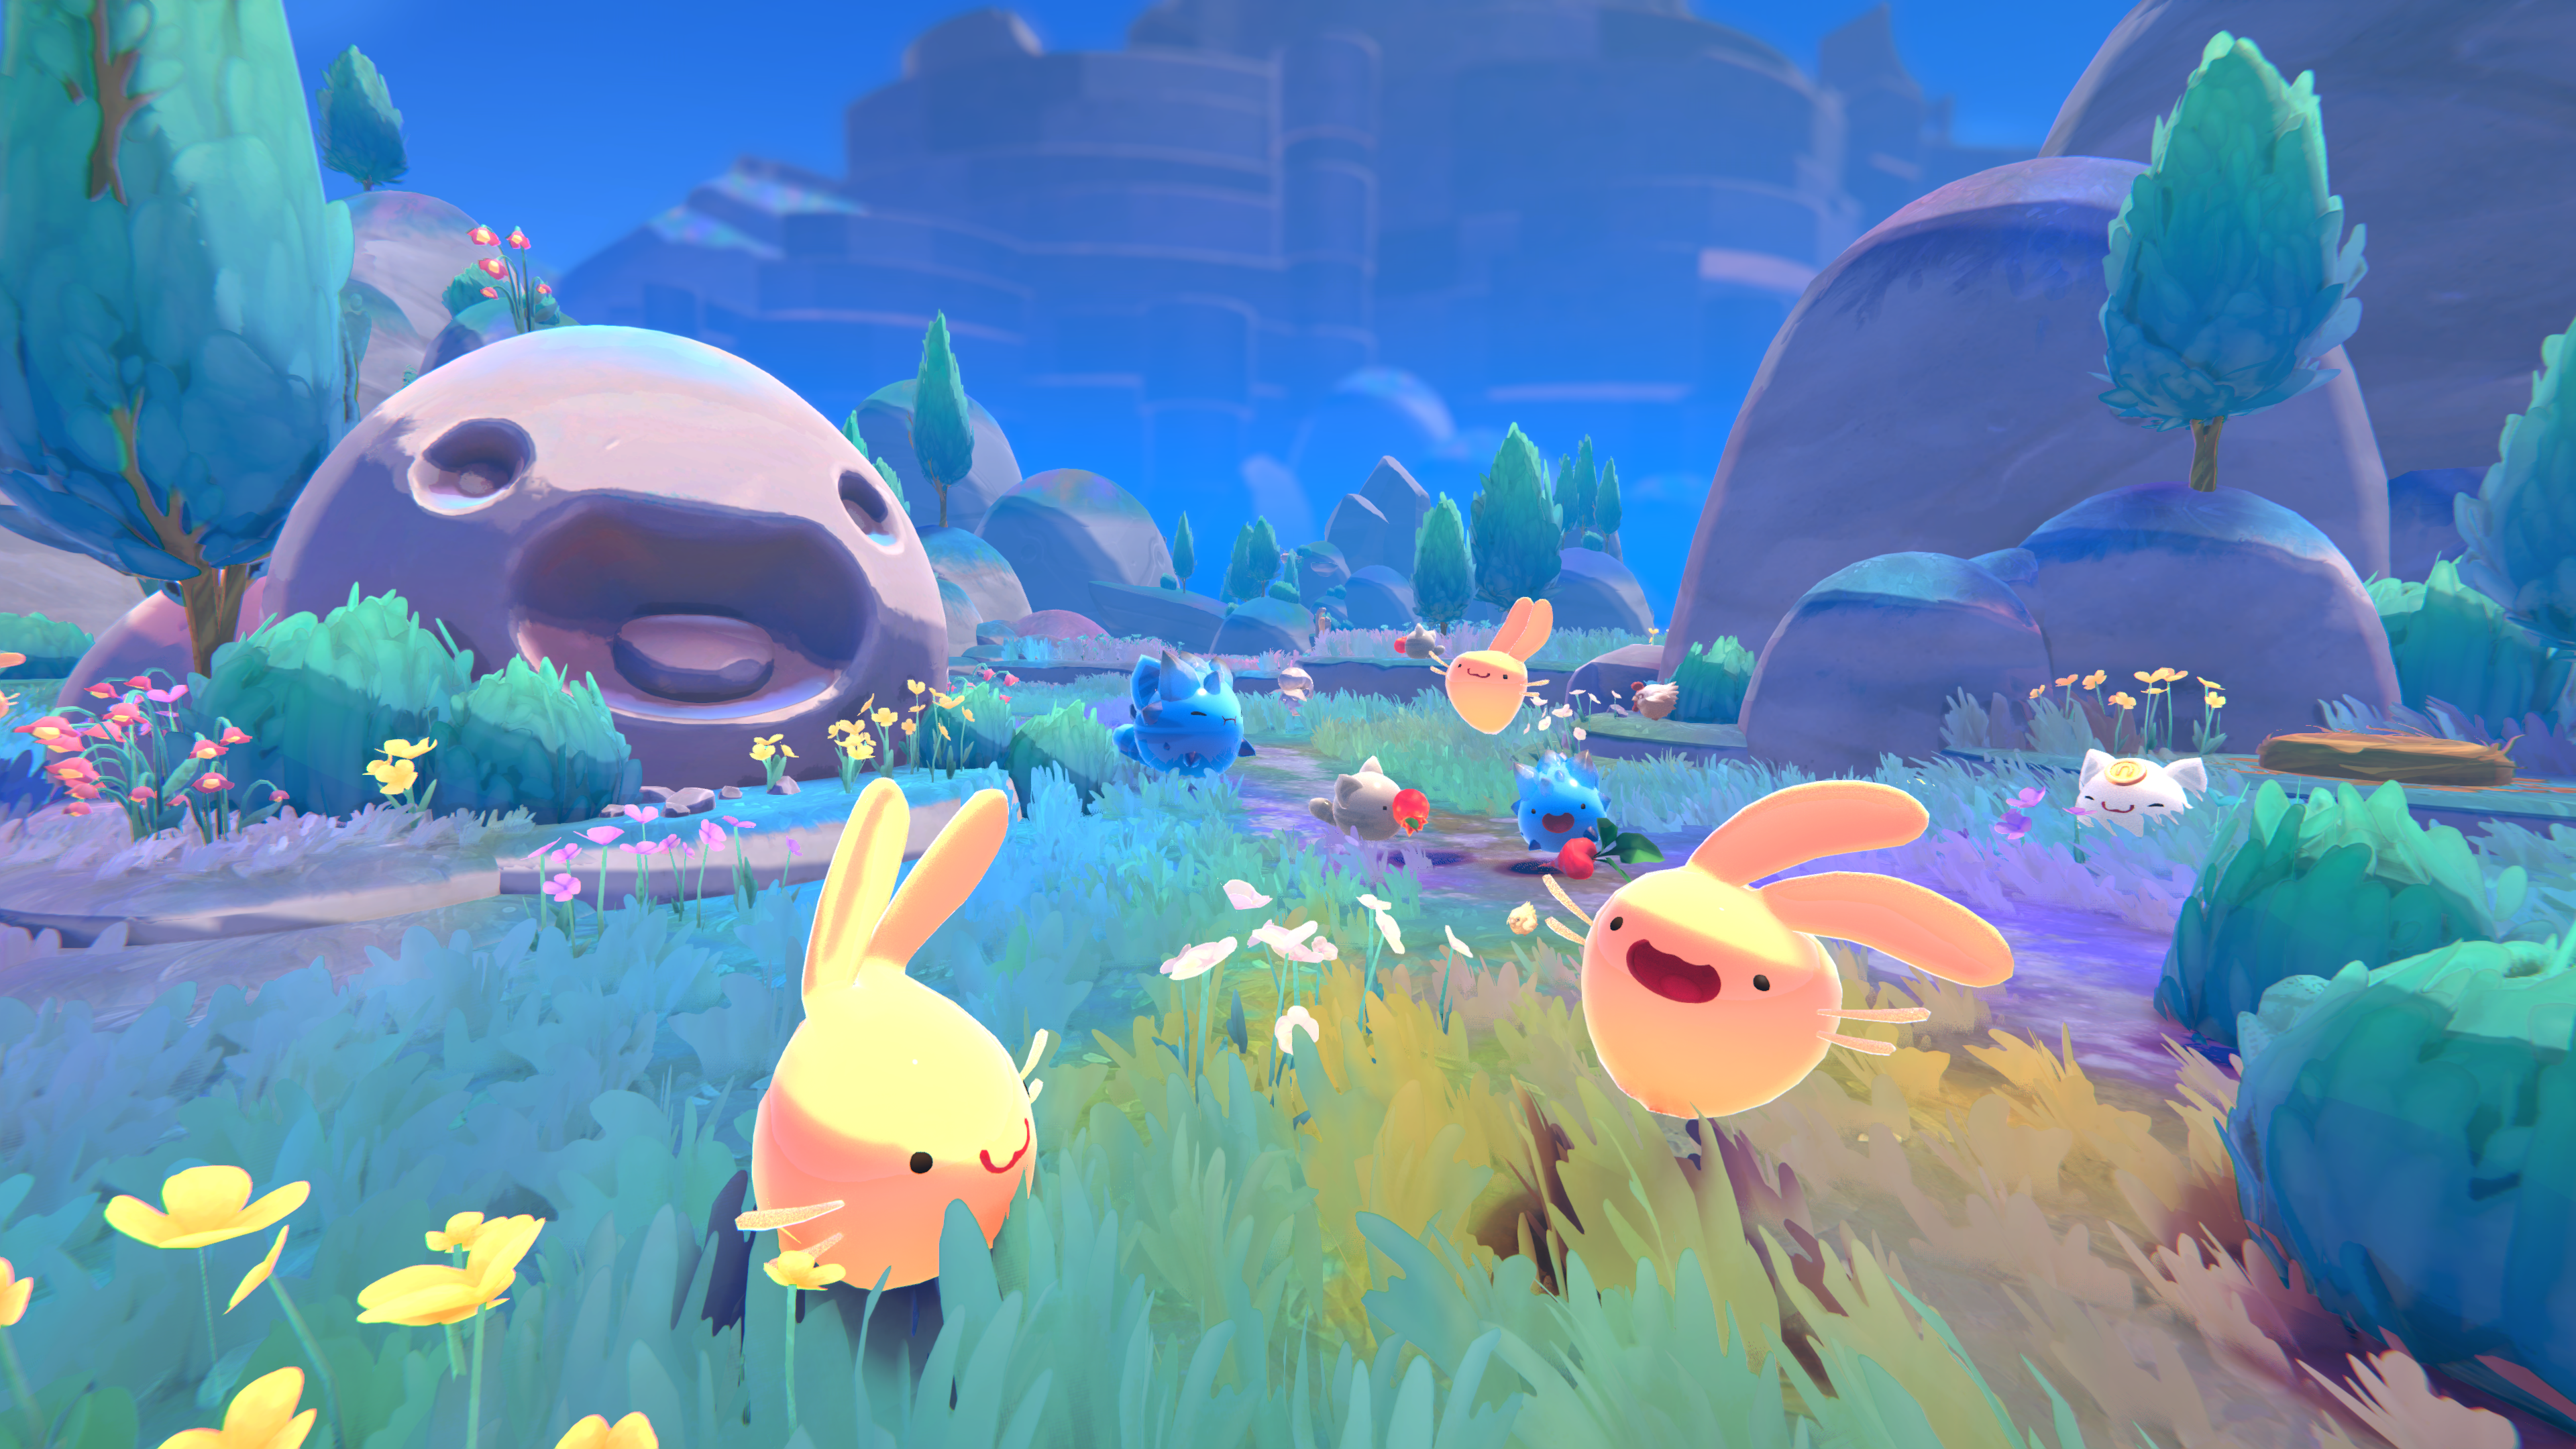 Will Slime Rancher 2 be on PlayStation 4 or PlayStation 5 consoles